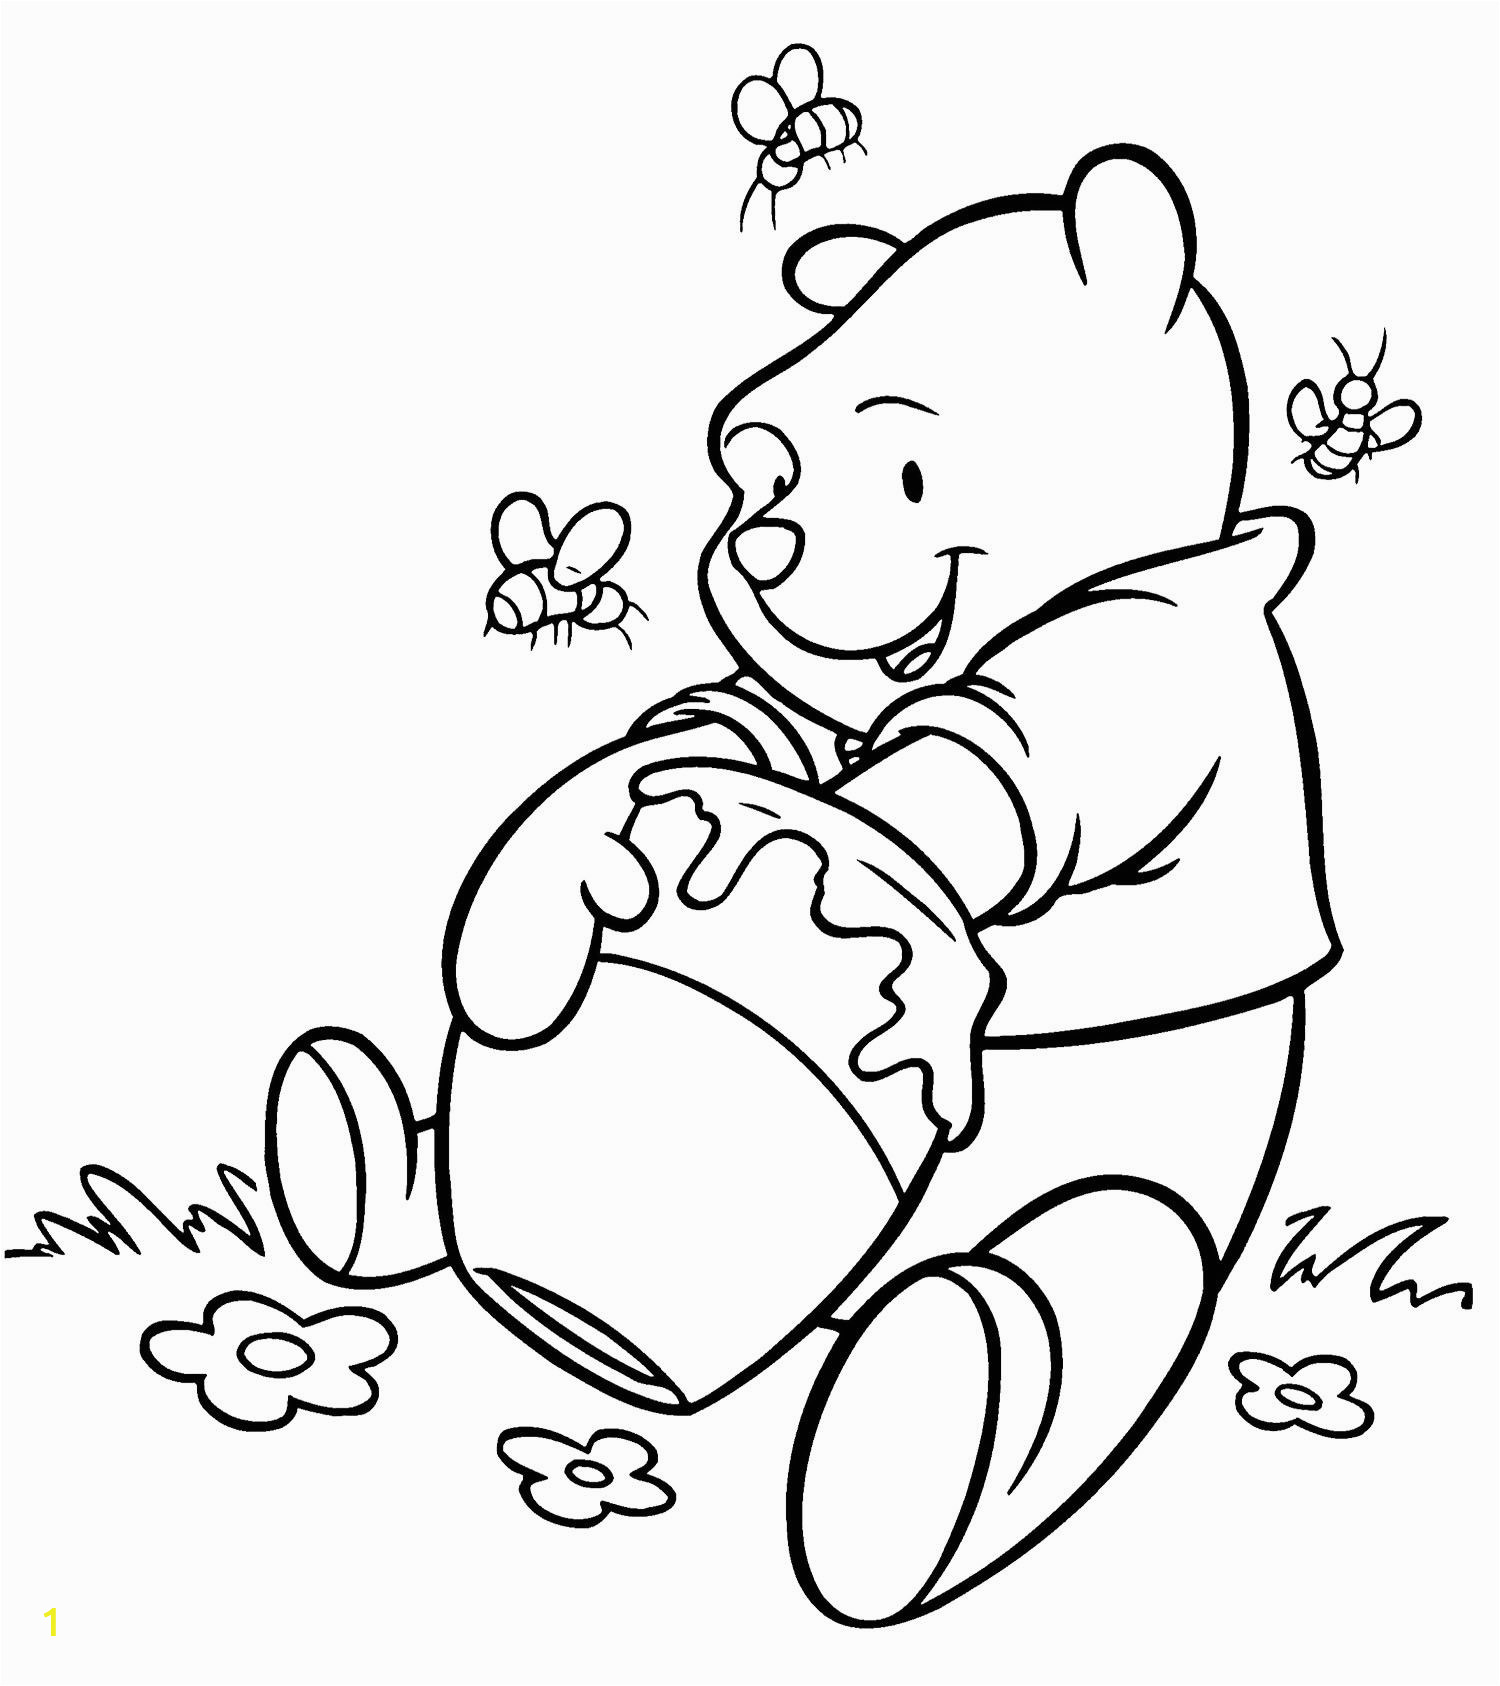 Winnie the Pooh with Honey Coloring Pages Winnie the Pooh Getting Delicious Honey Coloring Page